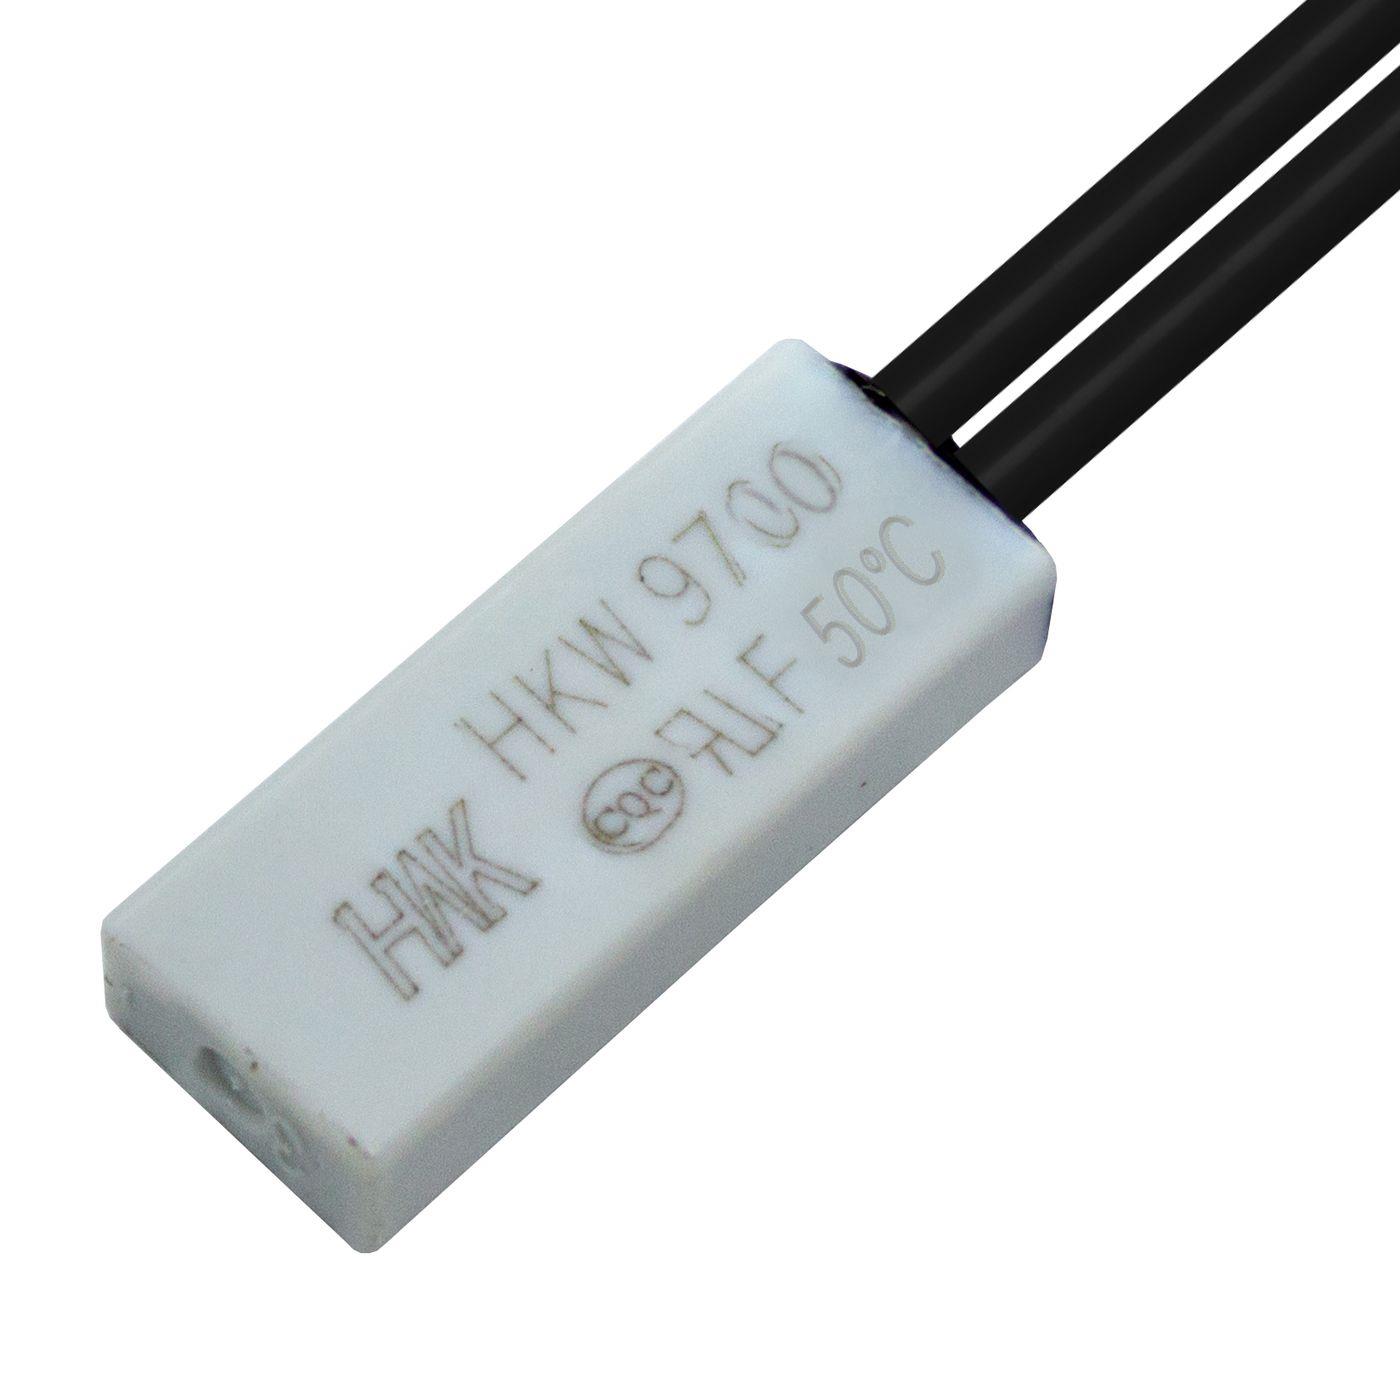 Thermal switch 50°C NC contact 250V 5A Cable Temperature switch thermostat Bimetal Thermal protection